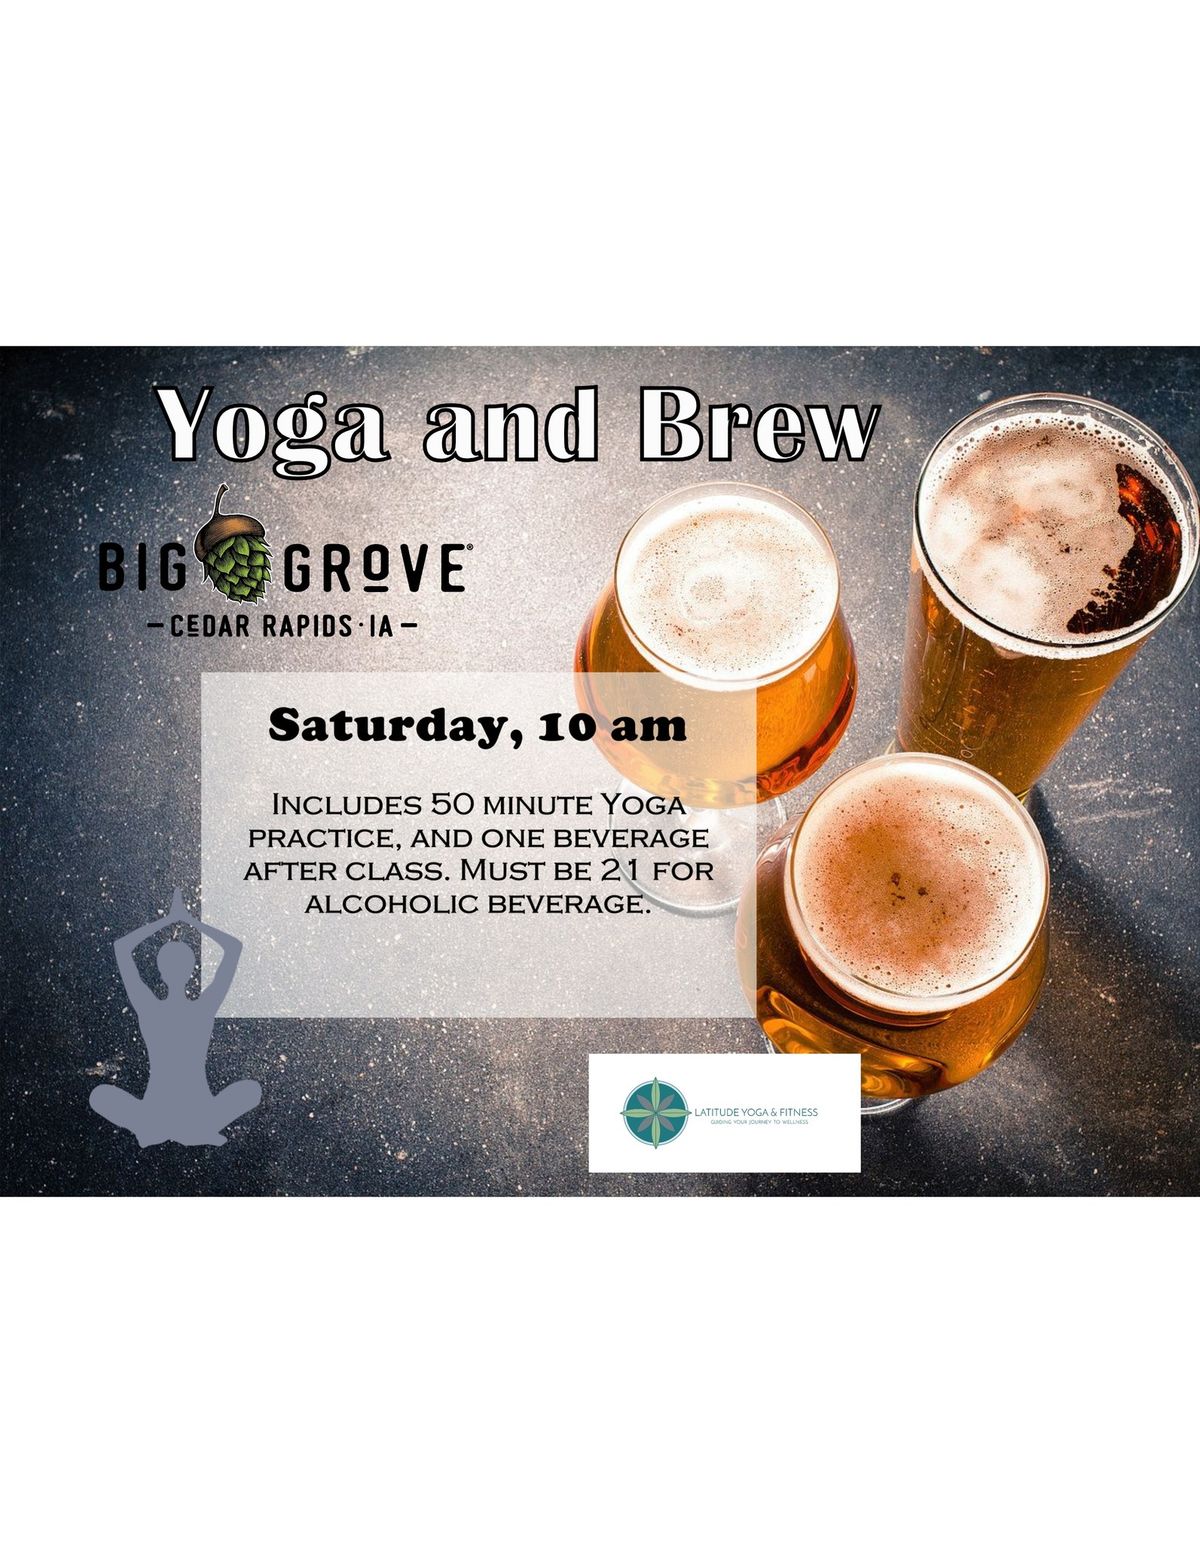 Yoga and Brew